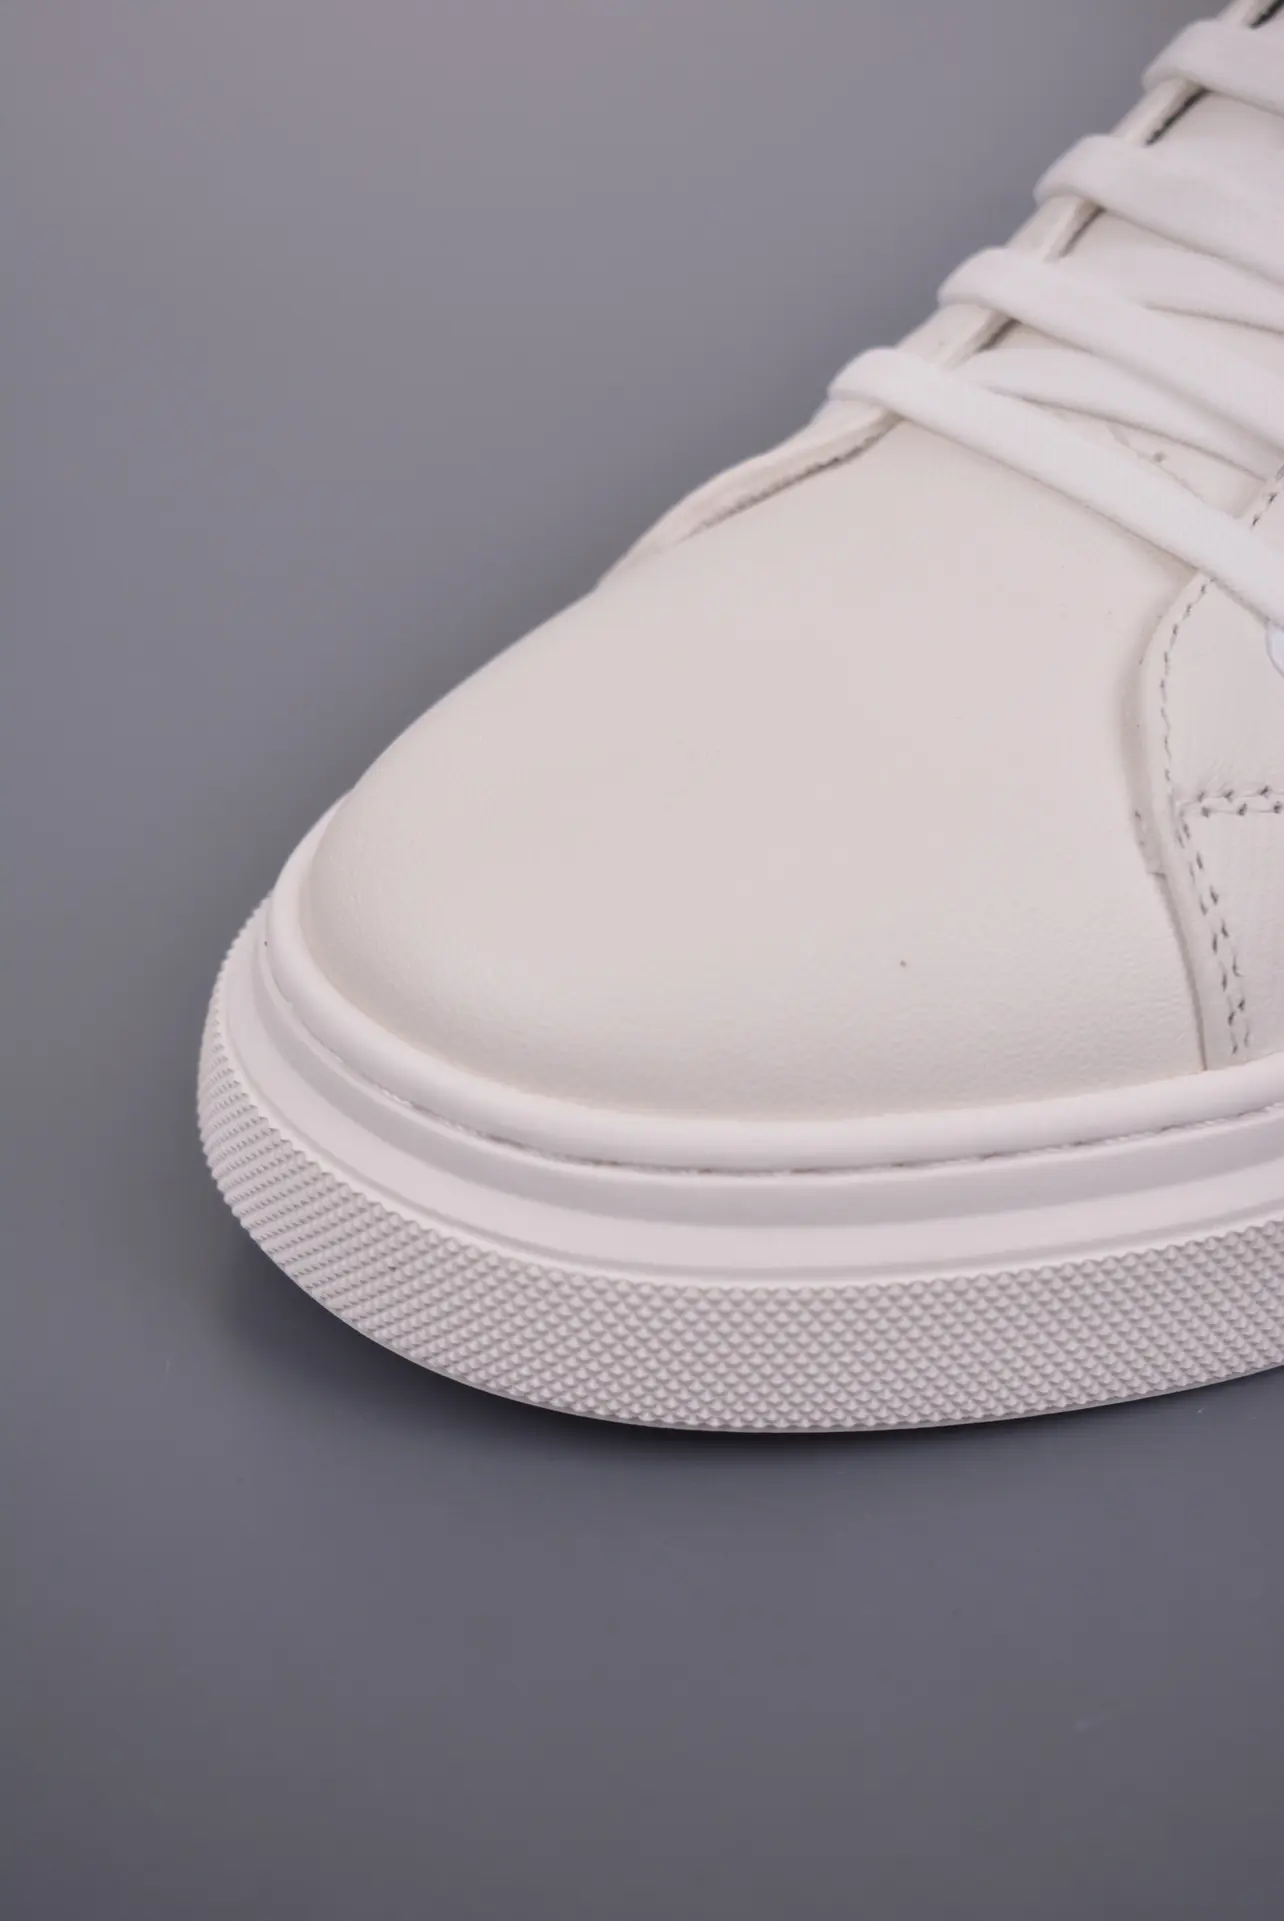 Louis Vuitton White/Brown Monogram Leather Time Out Trainer Sneakers Review | YtaYta